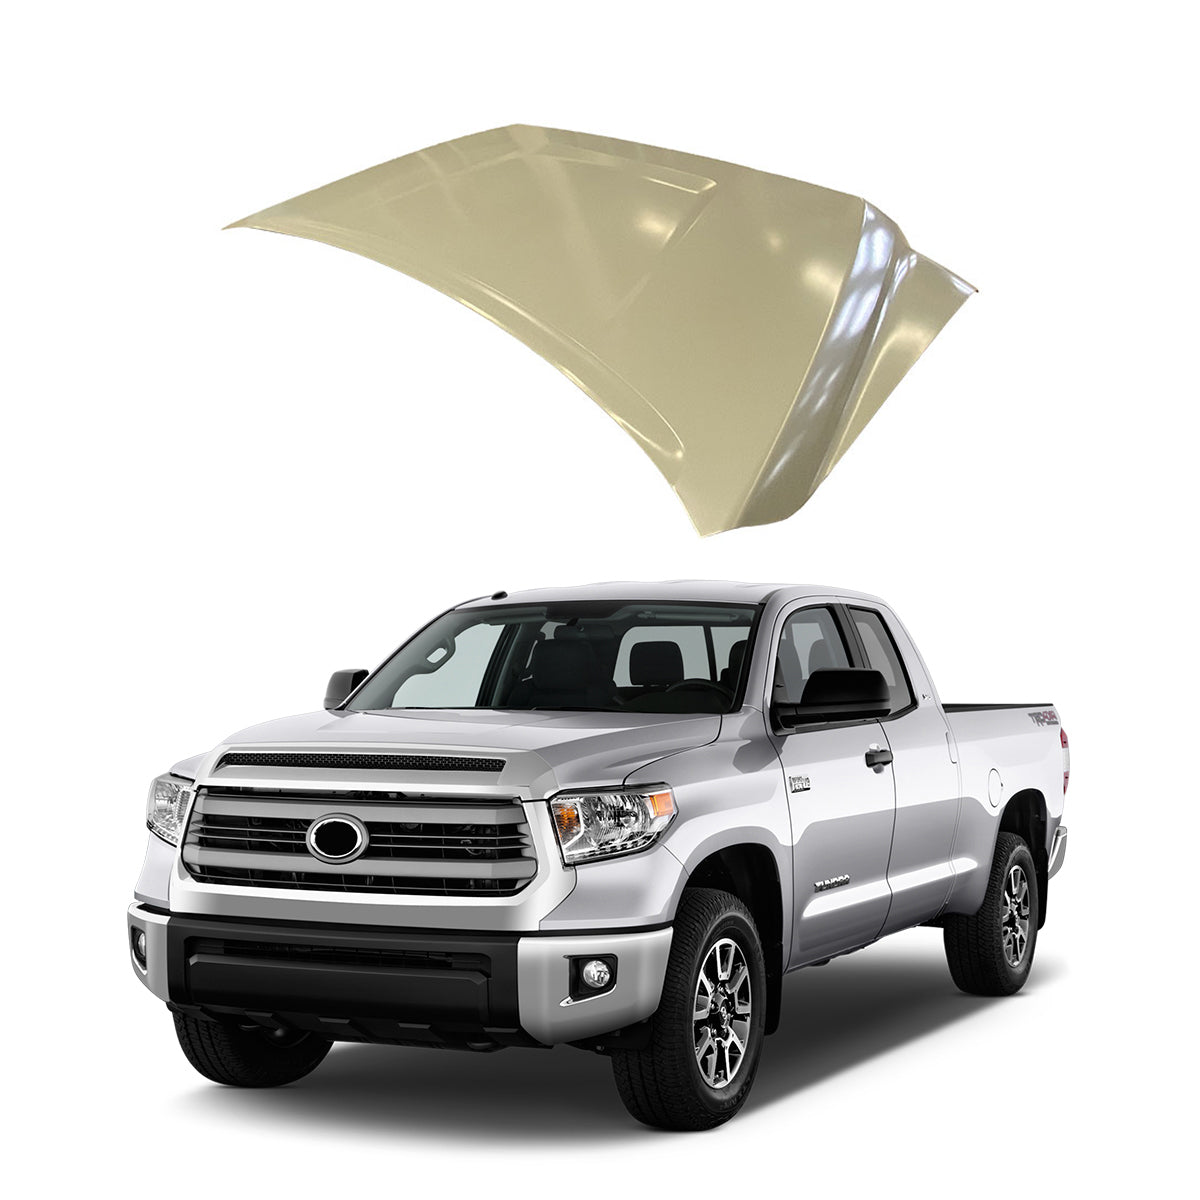 Replacement HOOD, 2014-2020 Toyota Tundra, (Steel)